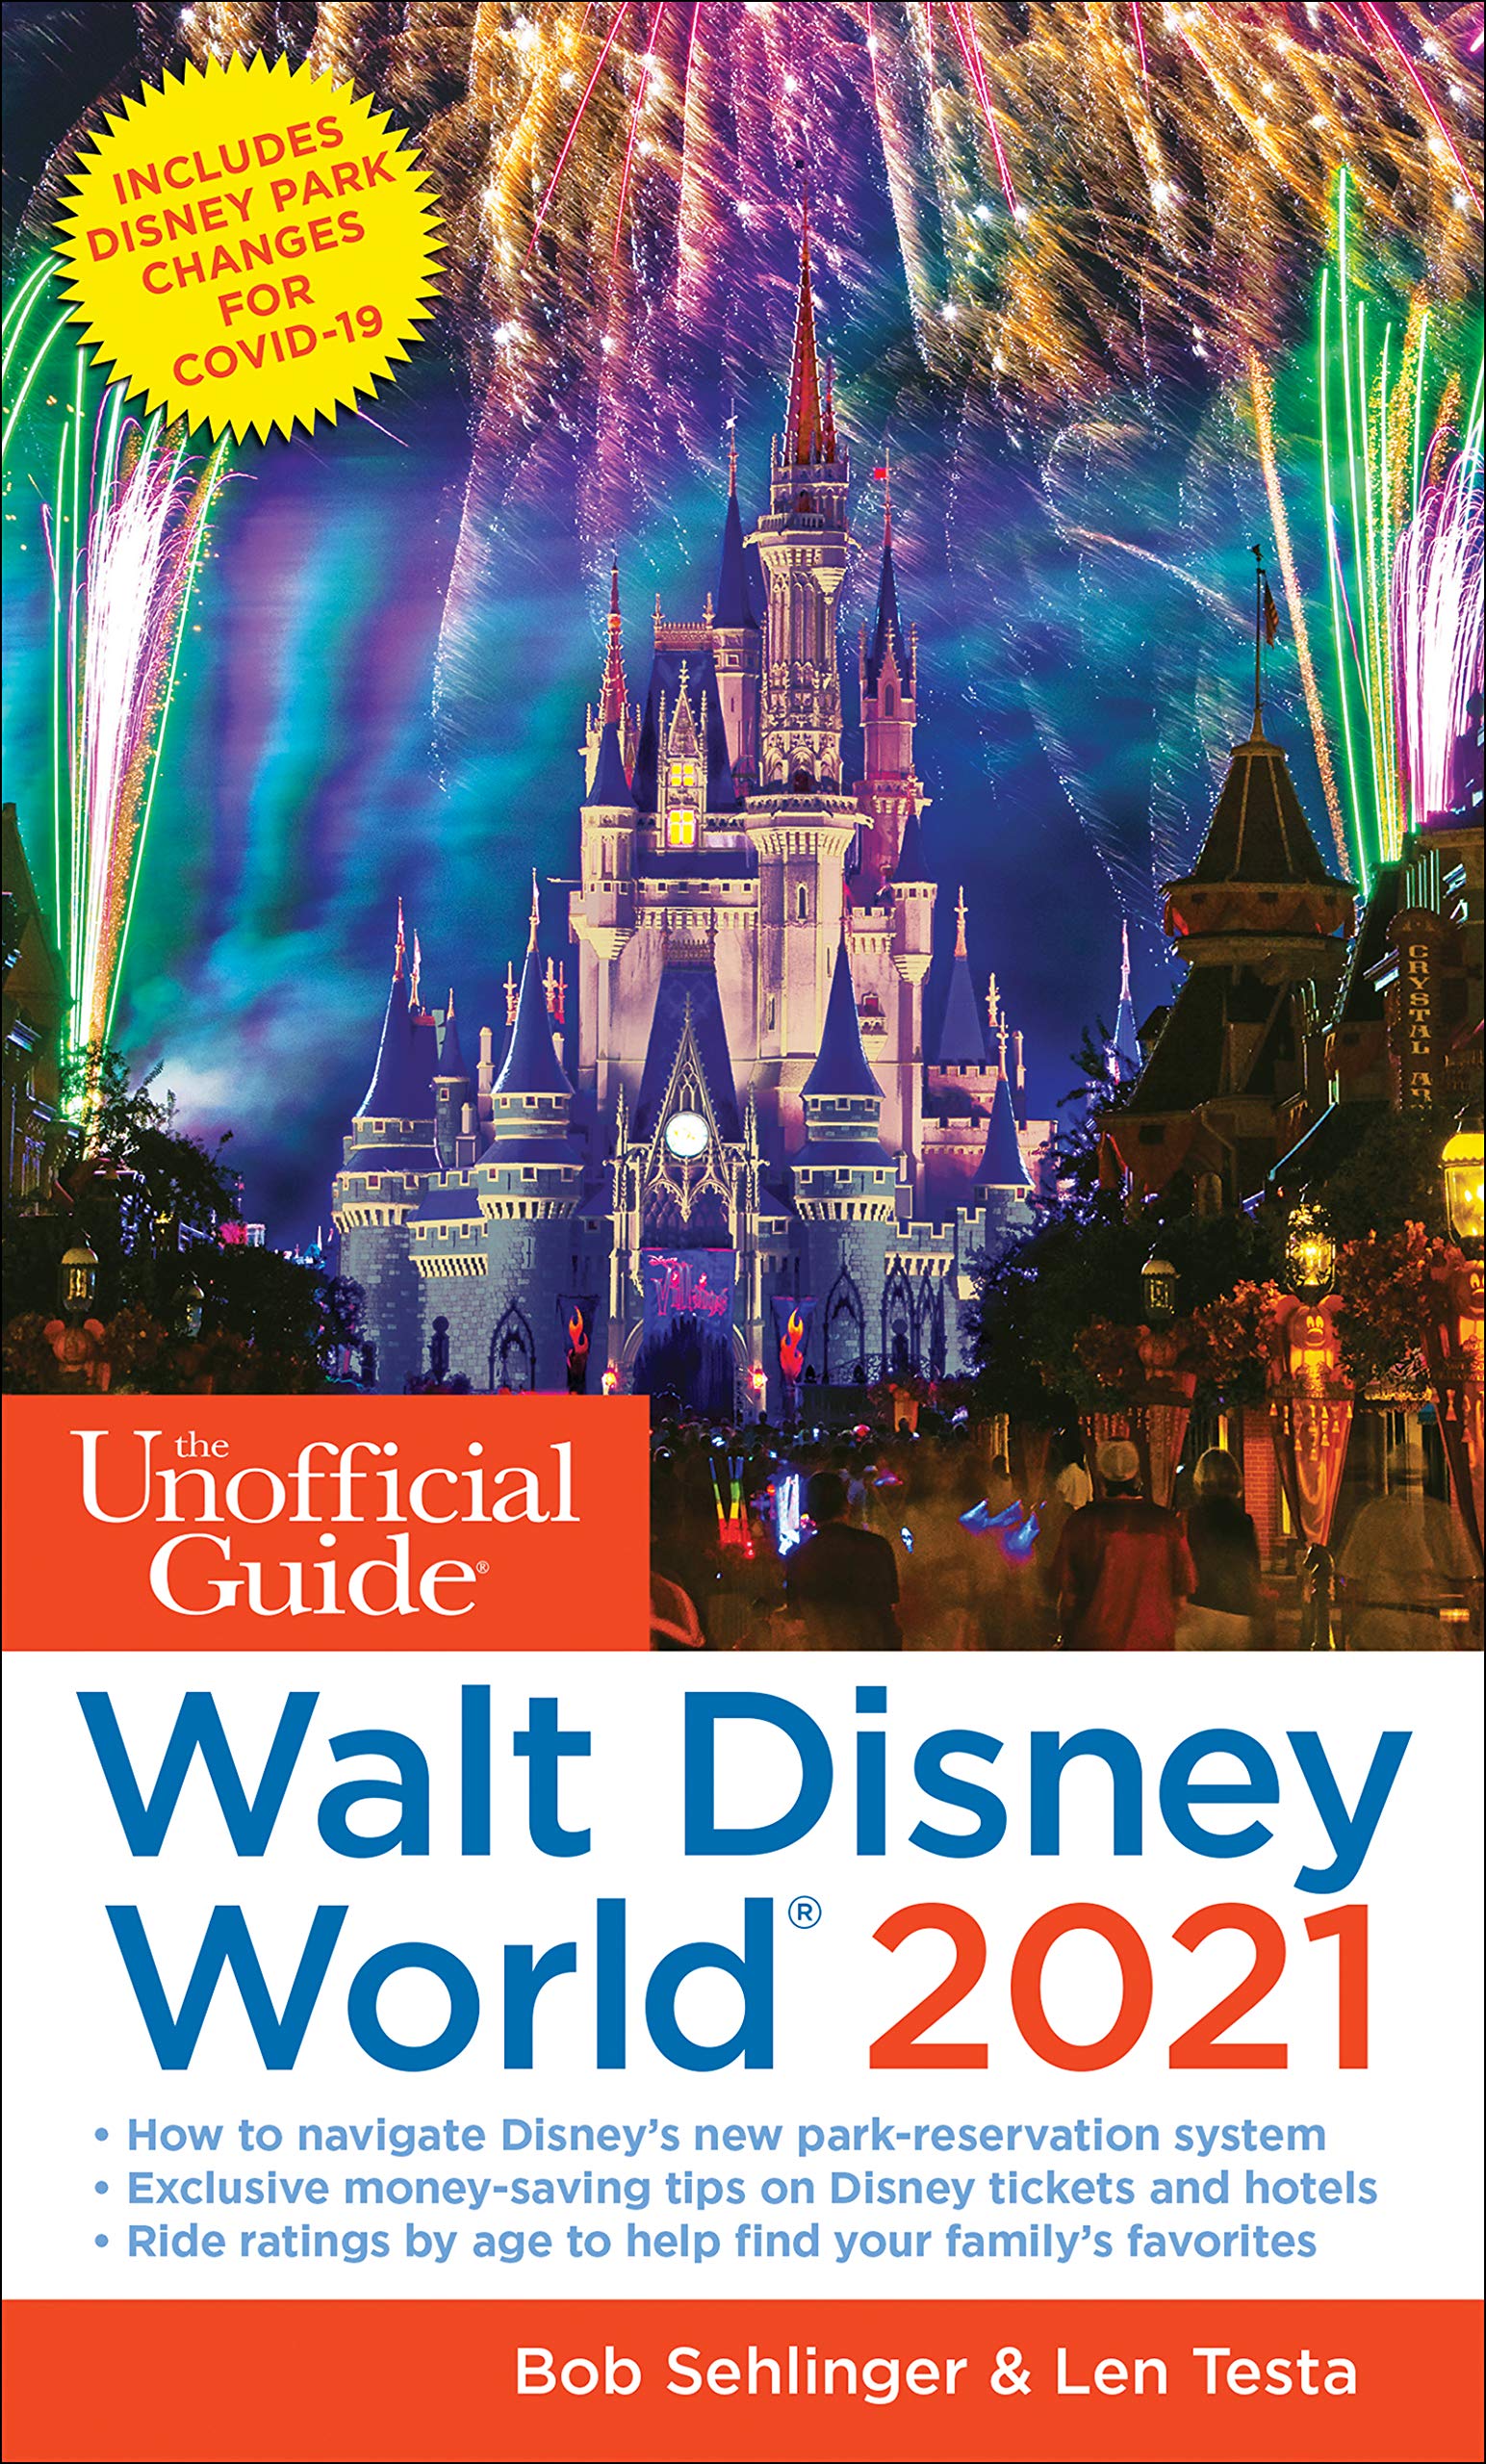 The Unofficial Guide to Walt Disney World 2021 (The Unofficial Guides)